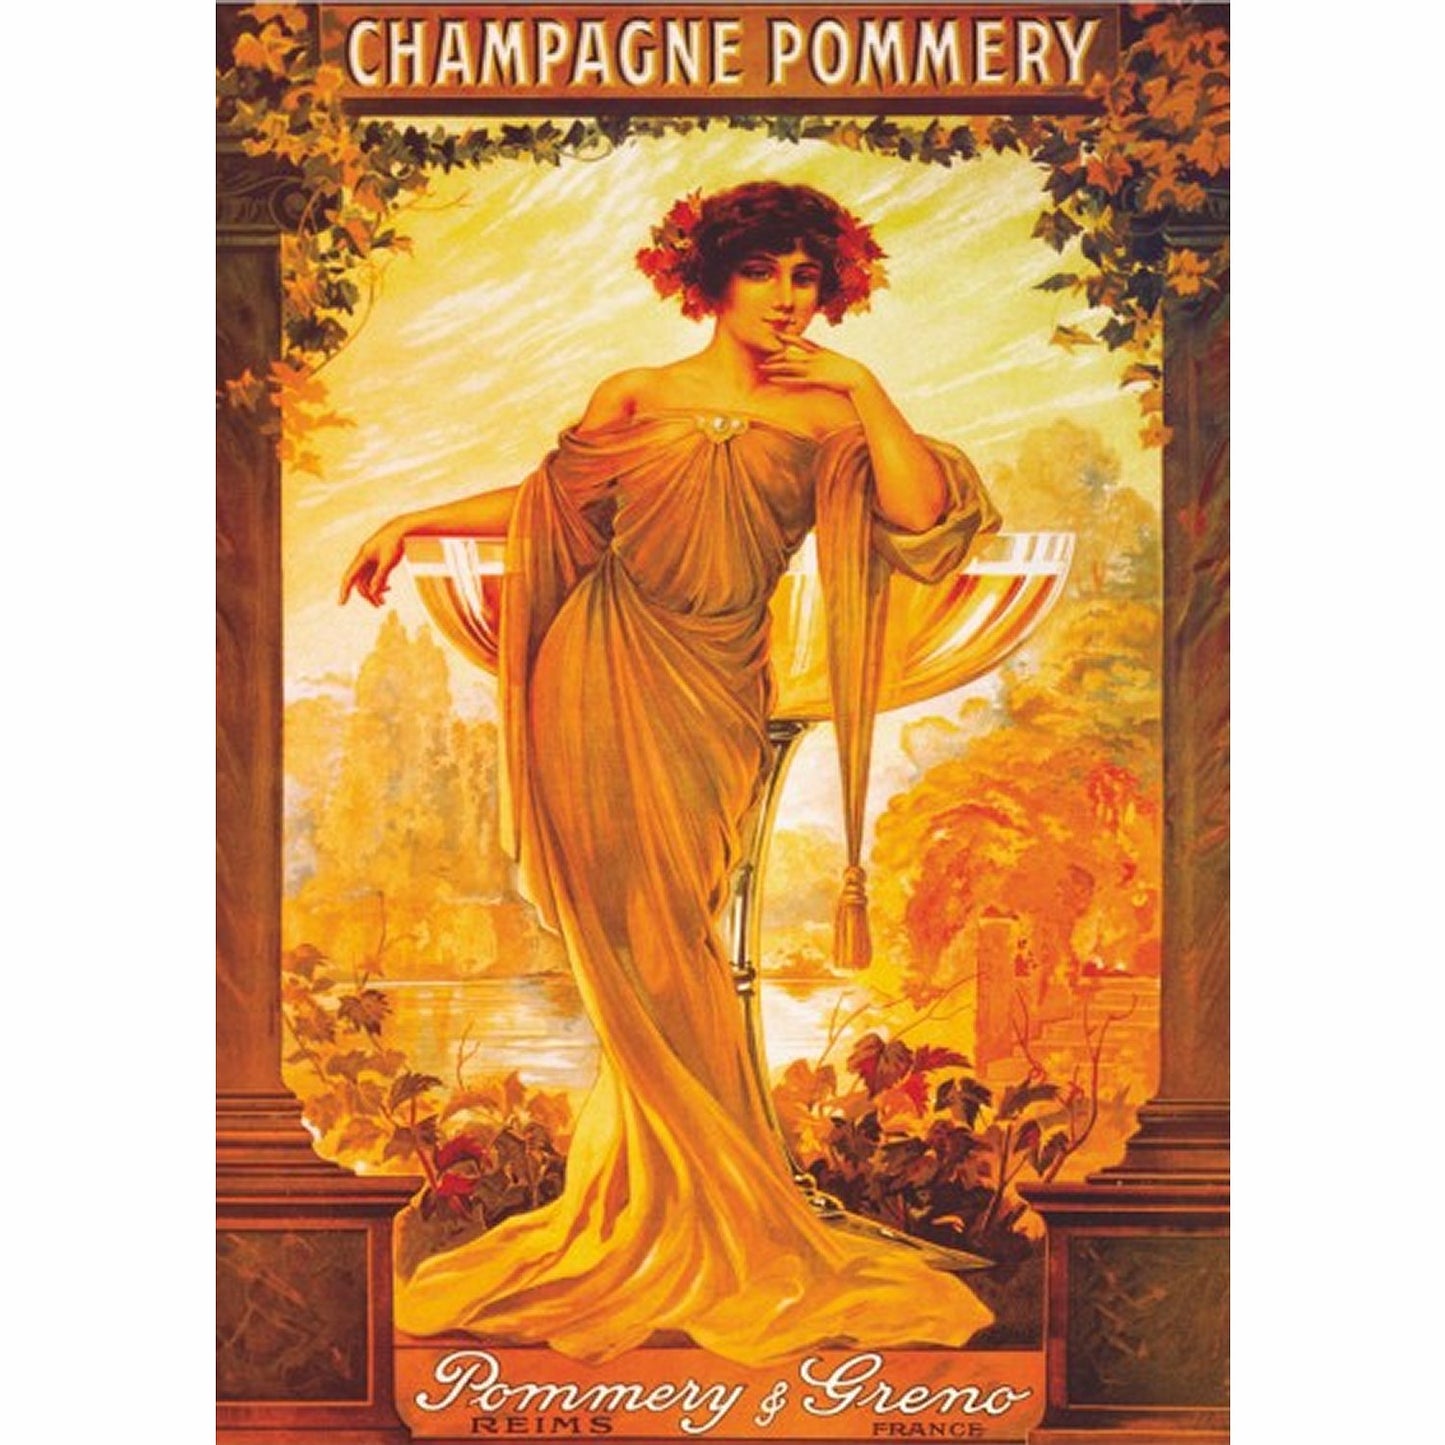 Dtoys - Jigsaw Puzzle - Vintage Posters : Champagne Pommery - 1000 Piece Jigsaw Puzzle